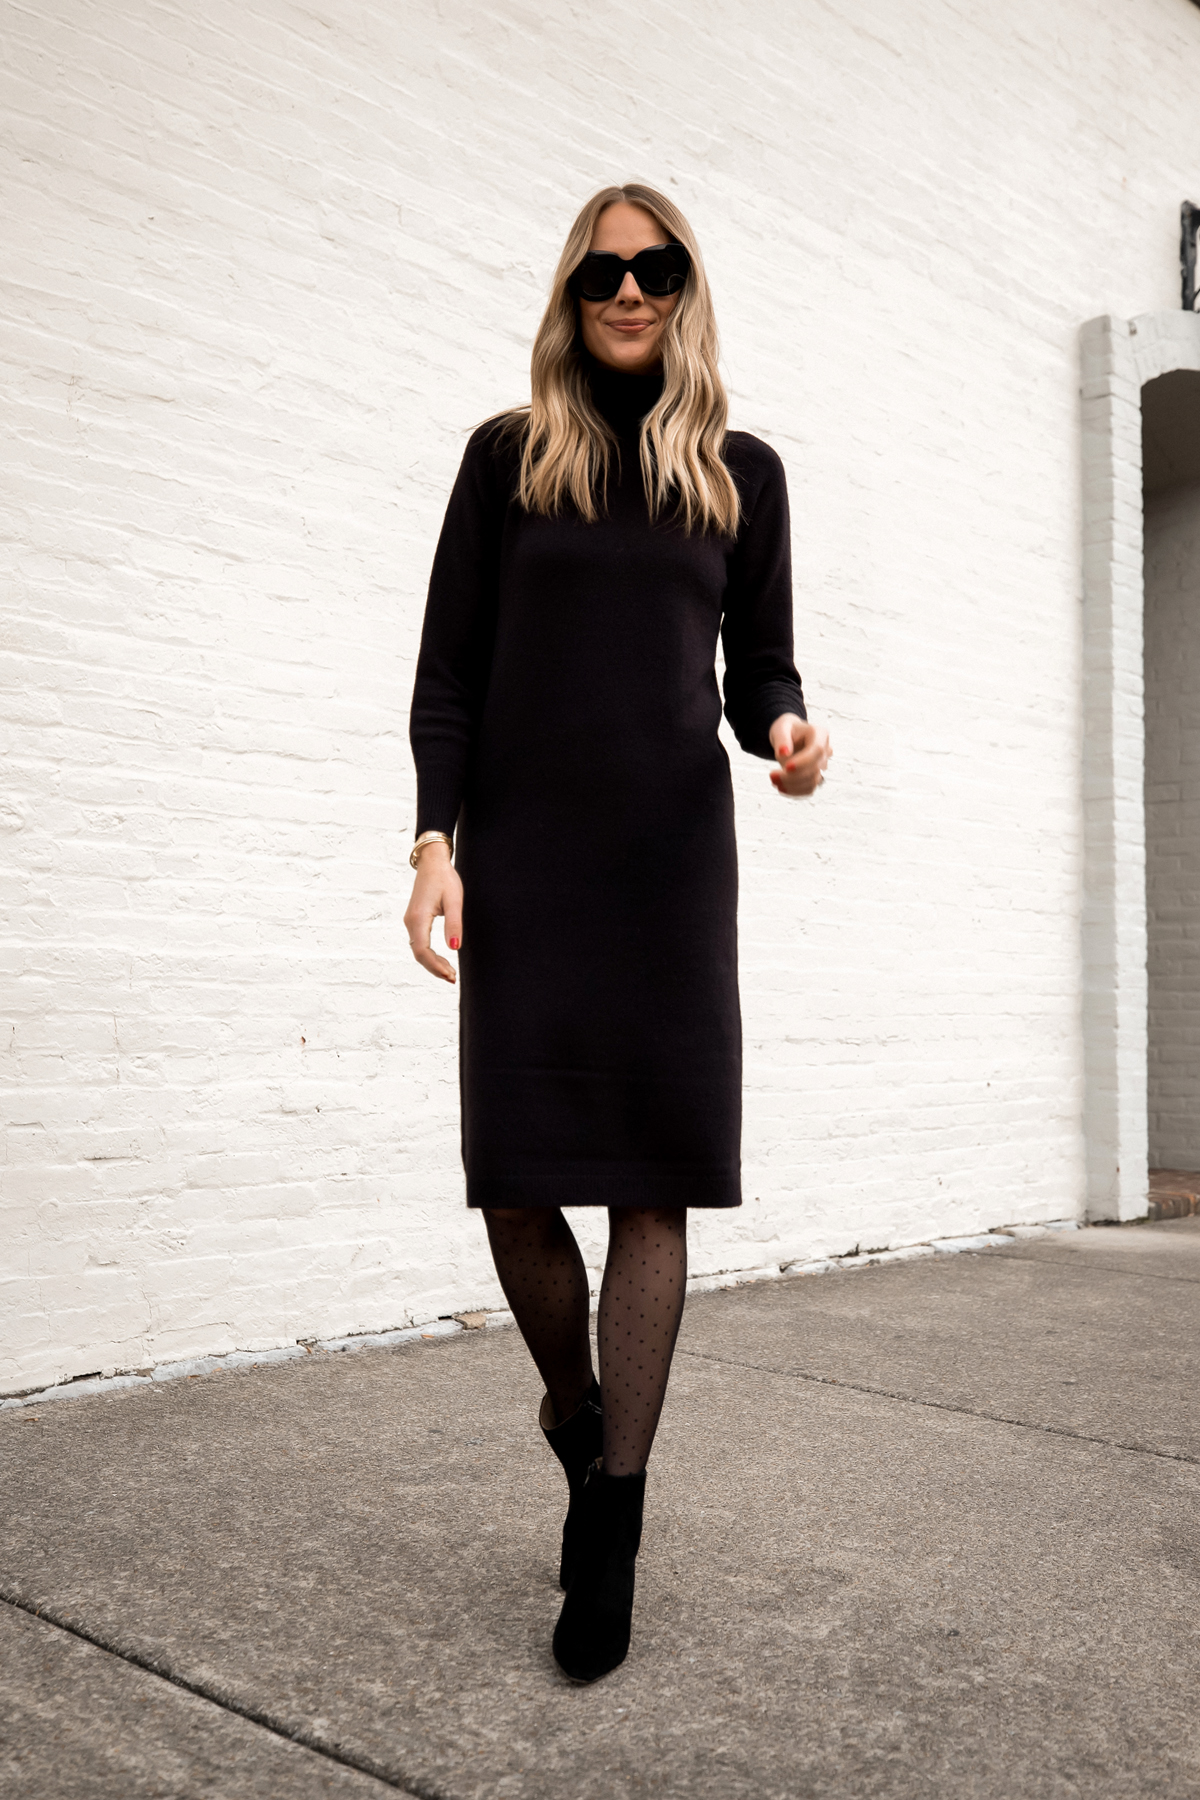 Fashion Jackson Wearing Ann Taylor Black Turtleneck Sweater Dress with Booties Black Ankle Booties Black Dot Tights